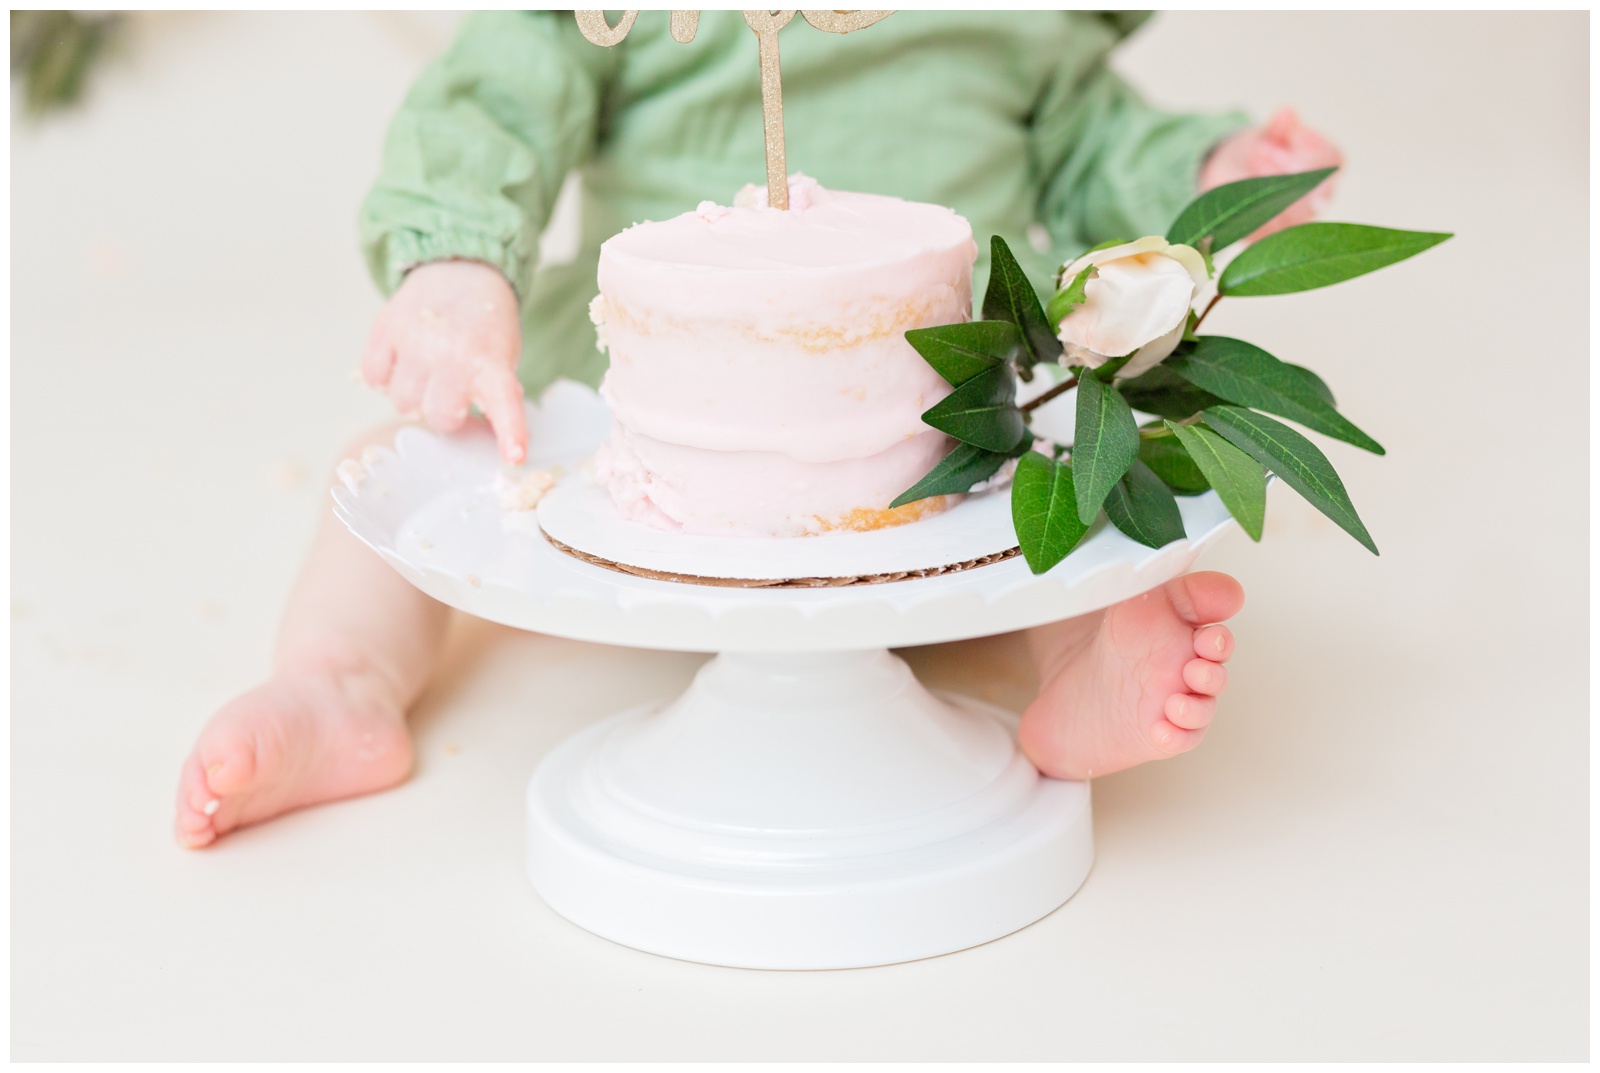 pink naked cake, baby toes, organic floral hoops in background, cake smash session